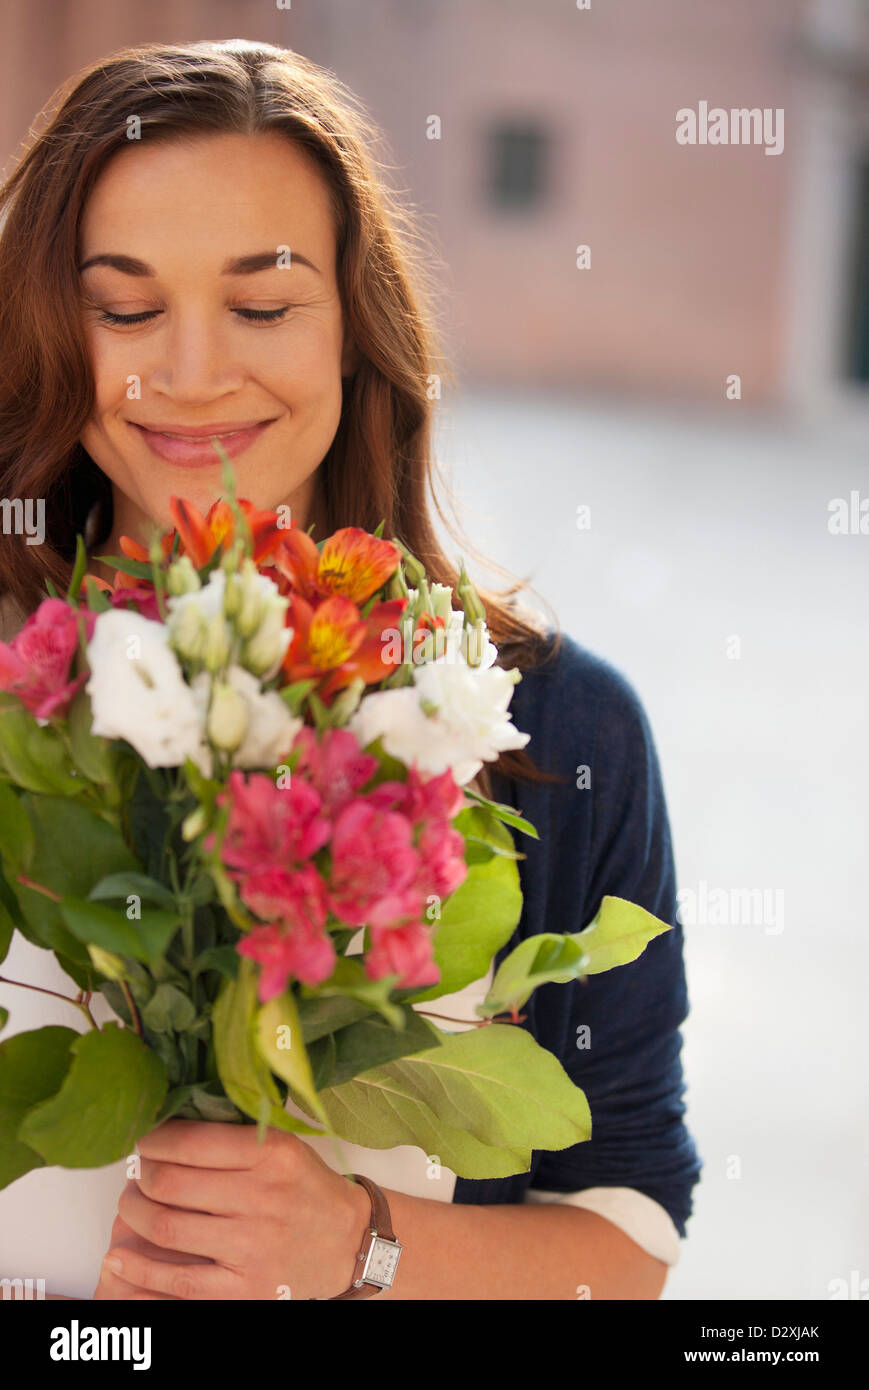 Smiling woman smelling bouquet of flowers Stock Photo